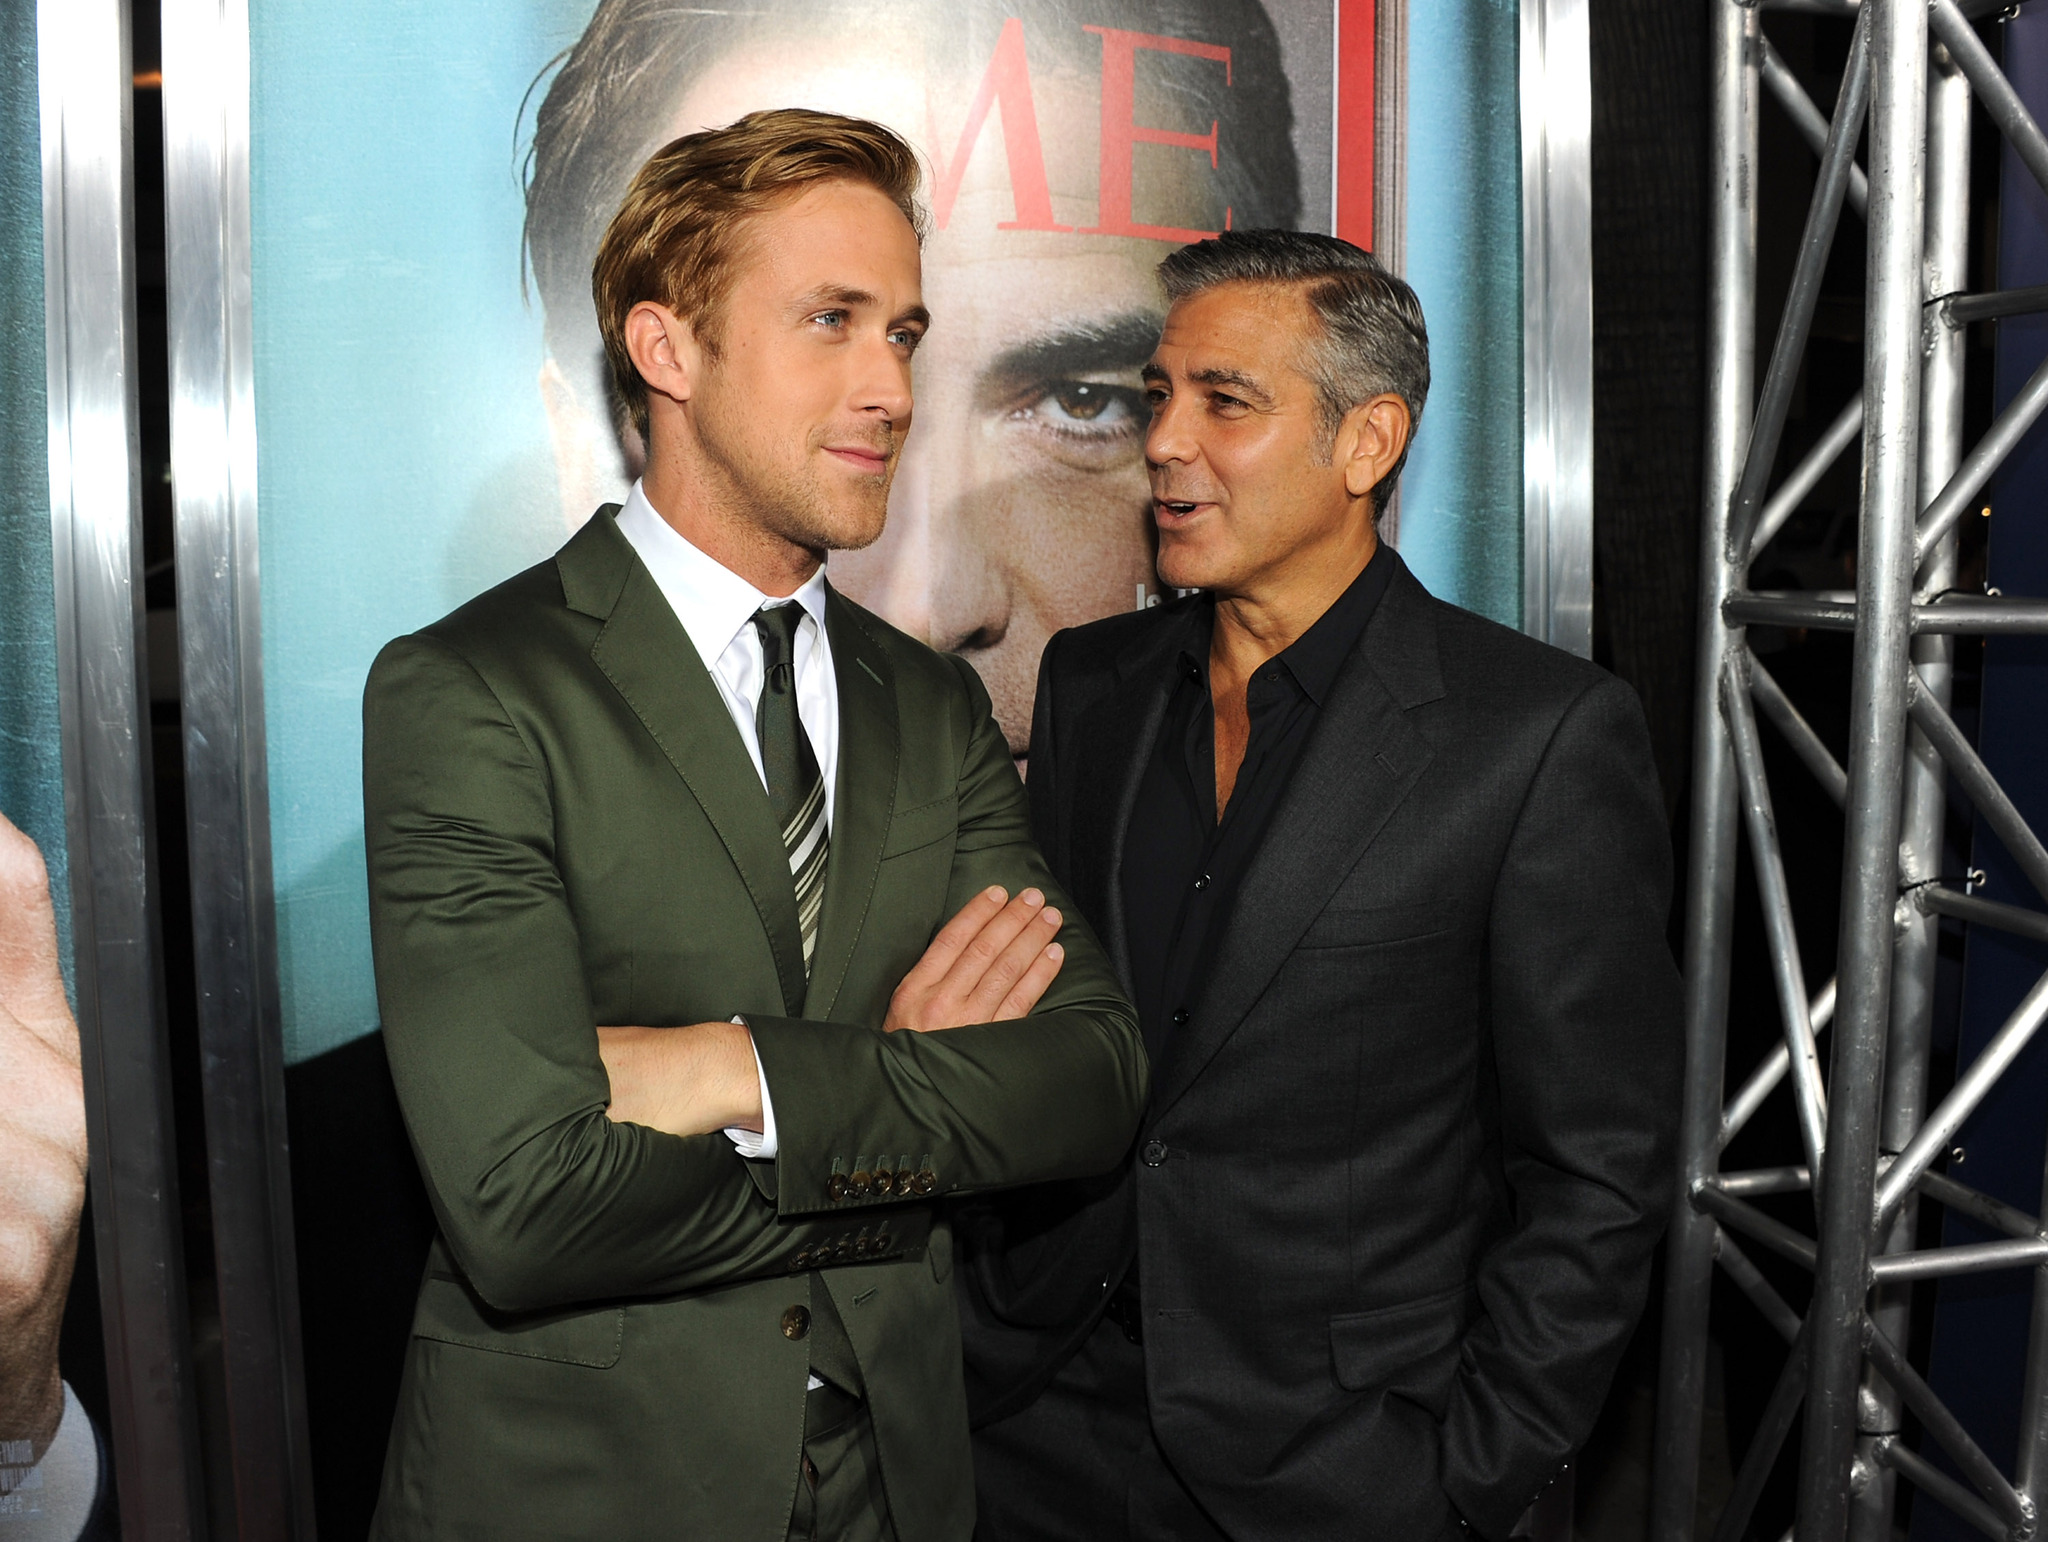 George Clooney and Ryan Gosling at event of Purvini zaidimai (2011)